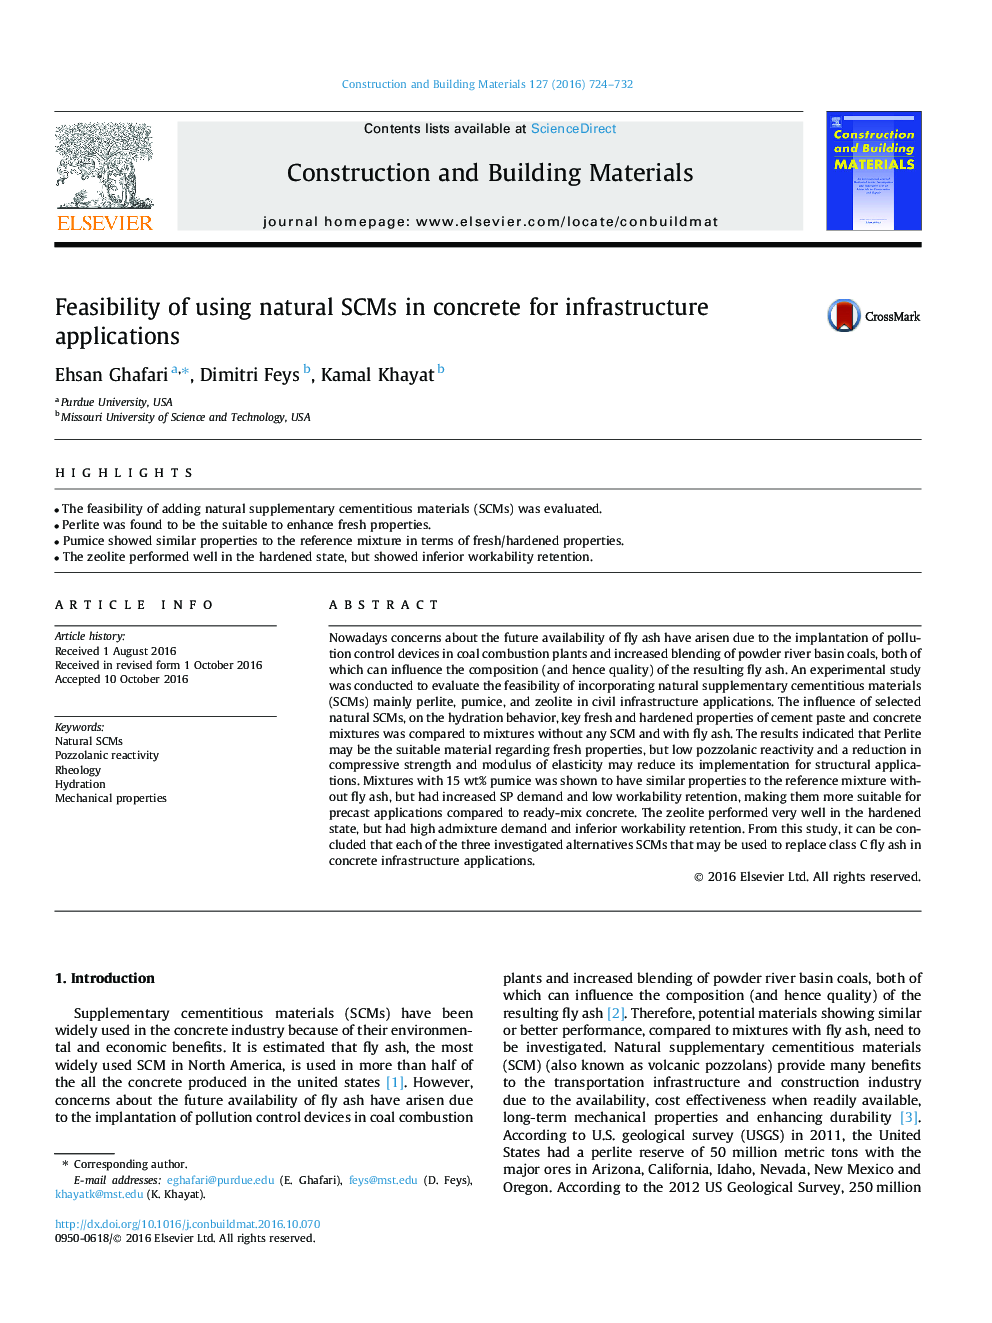 Feasibility of using natural SCMs in concrete for infrastructure applications